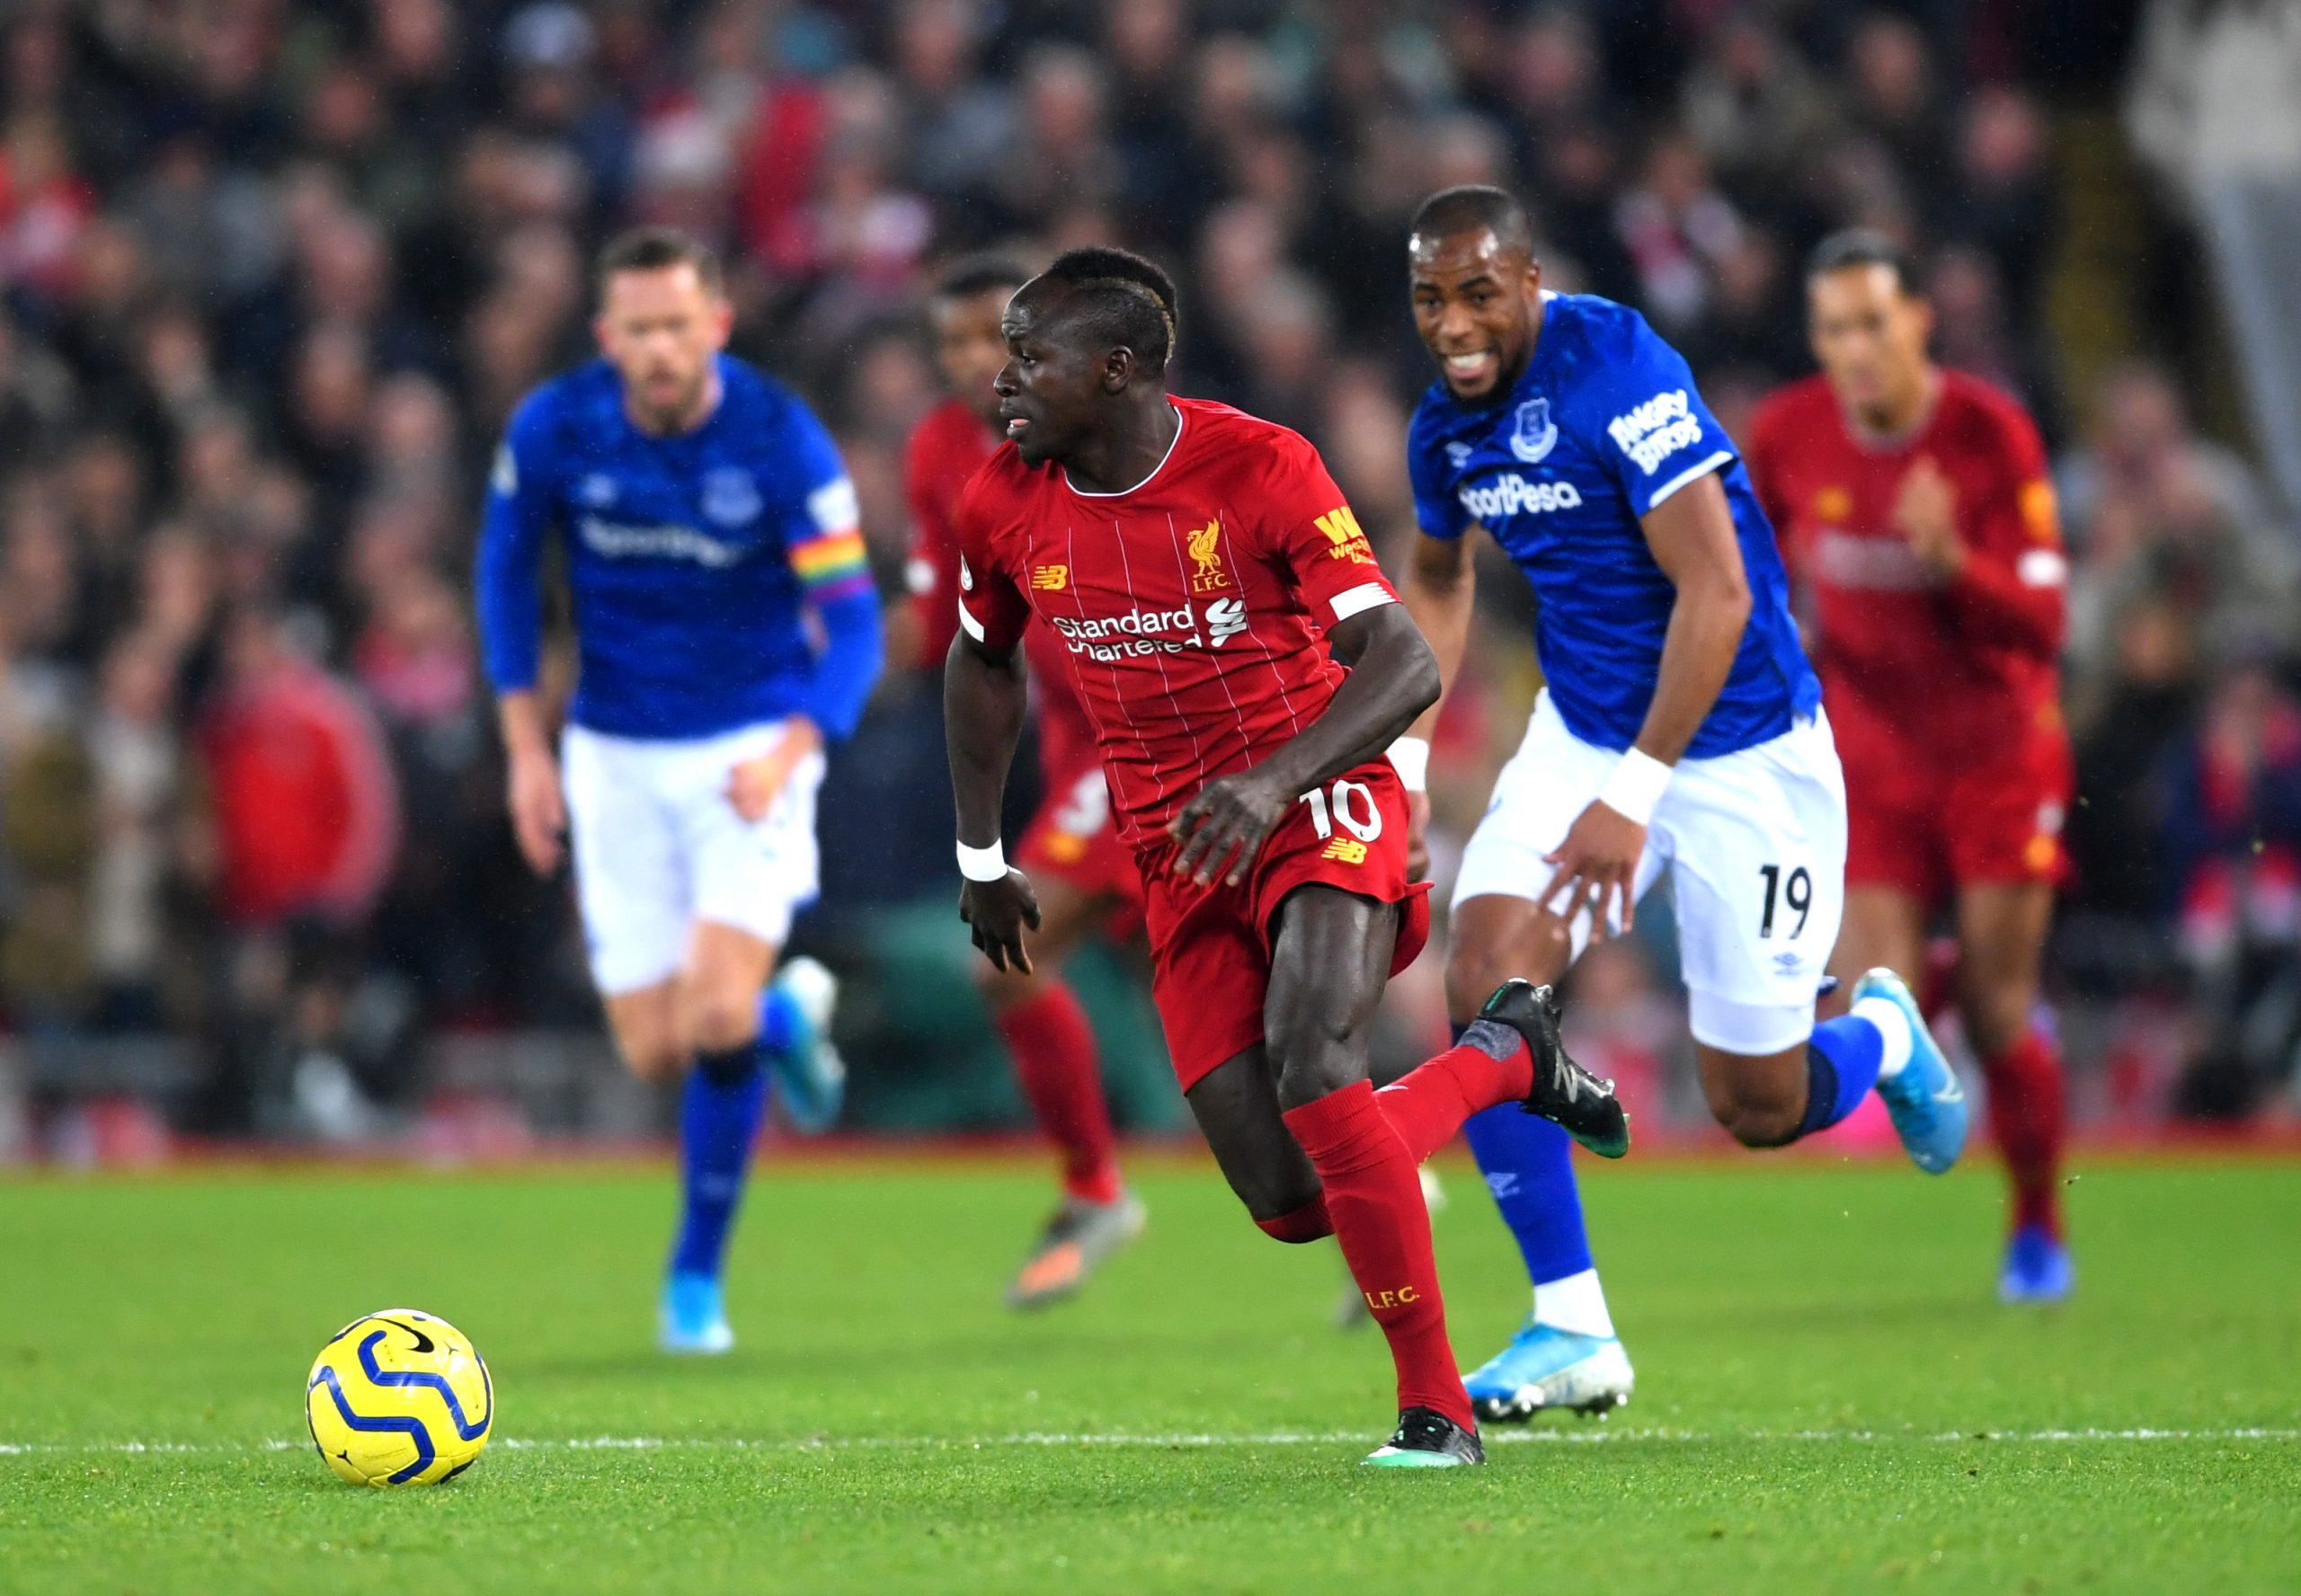 20191204 The18 Image Sadio Mane Passing GettyImages 1191947142 scaled